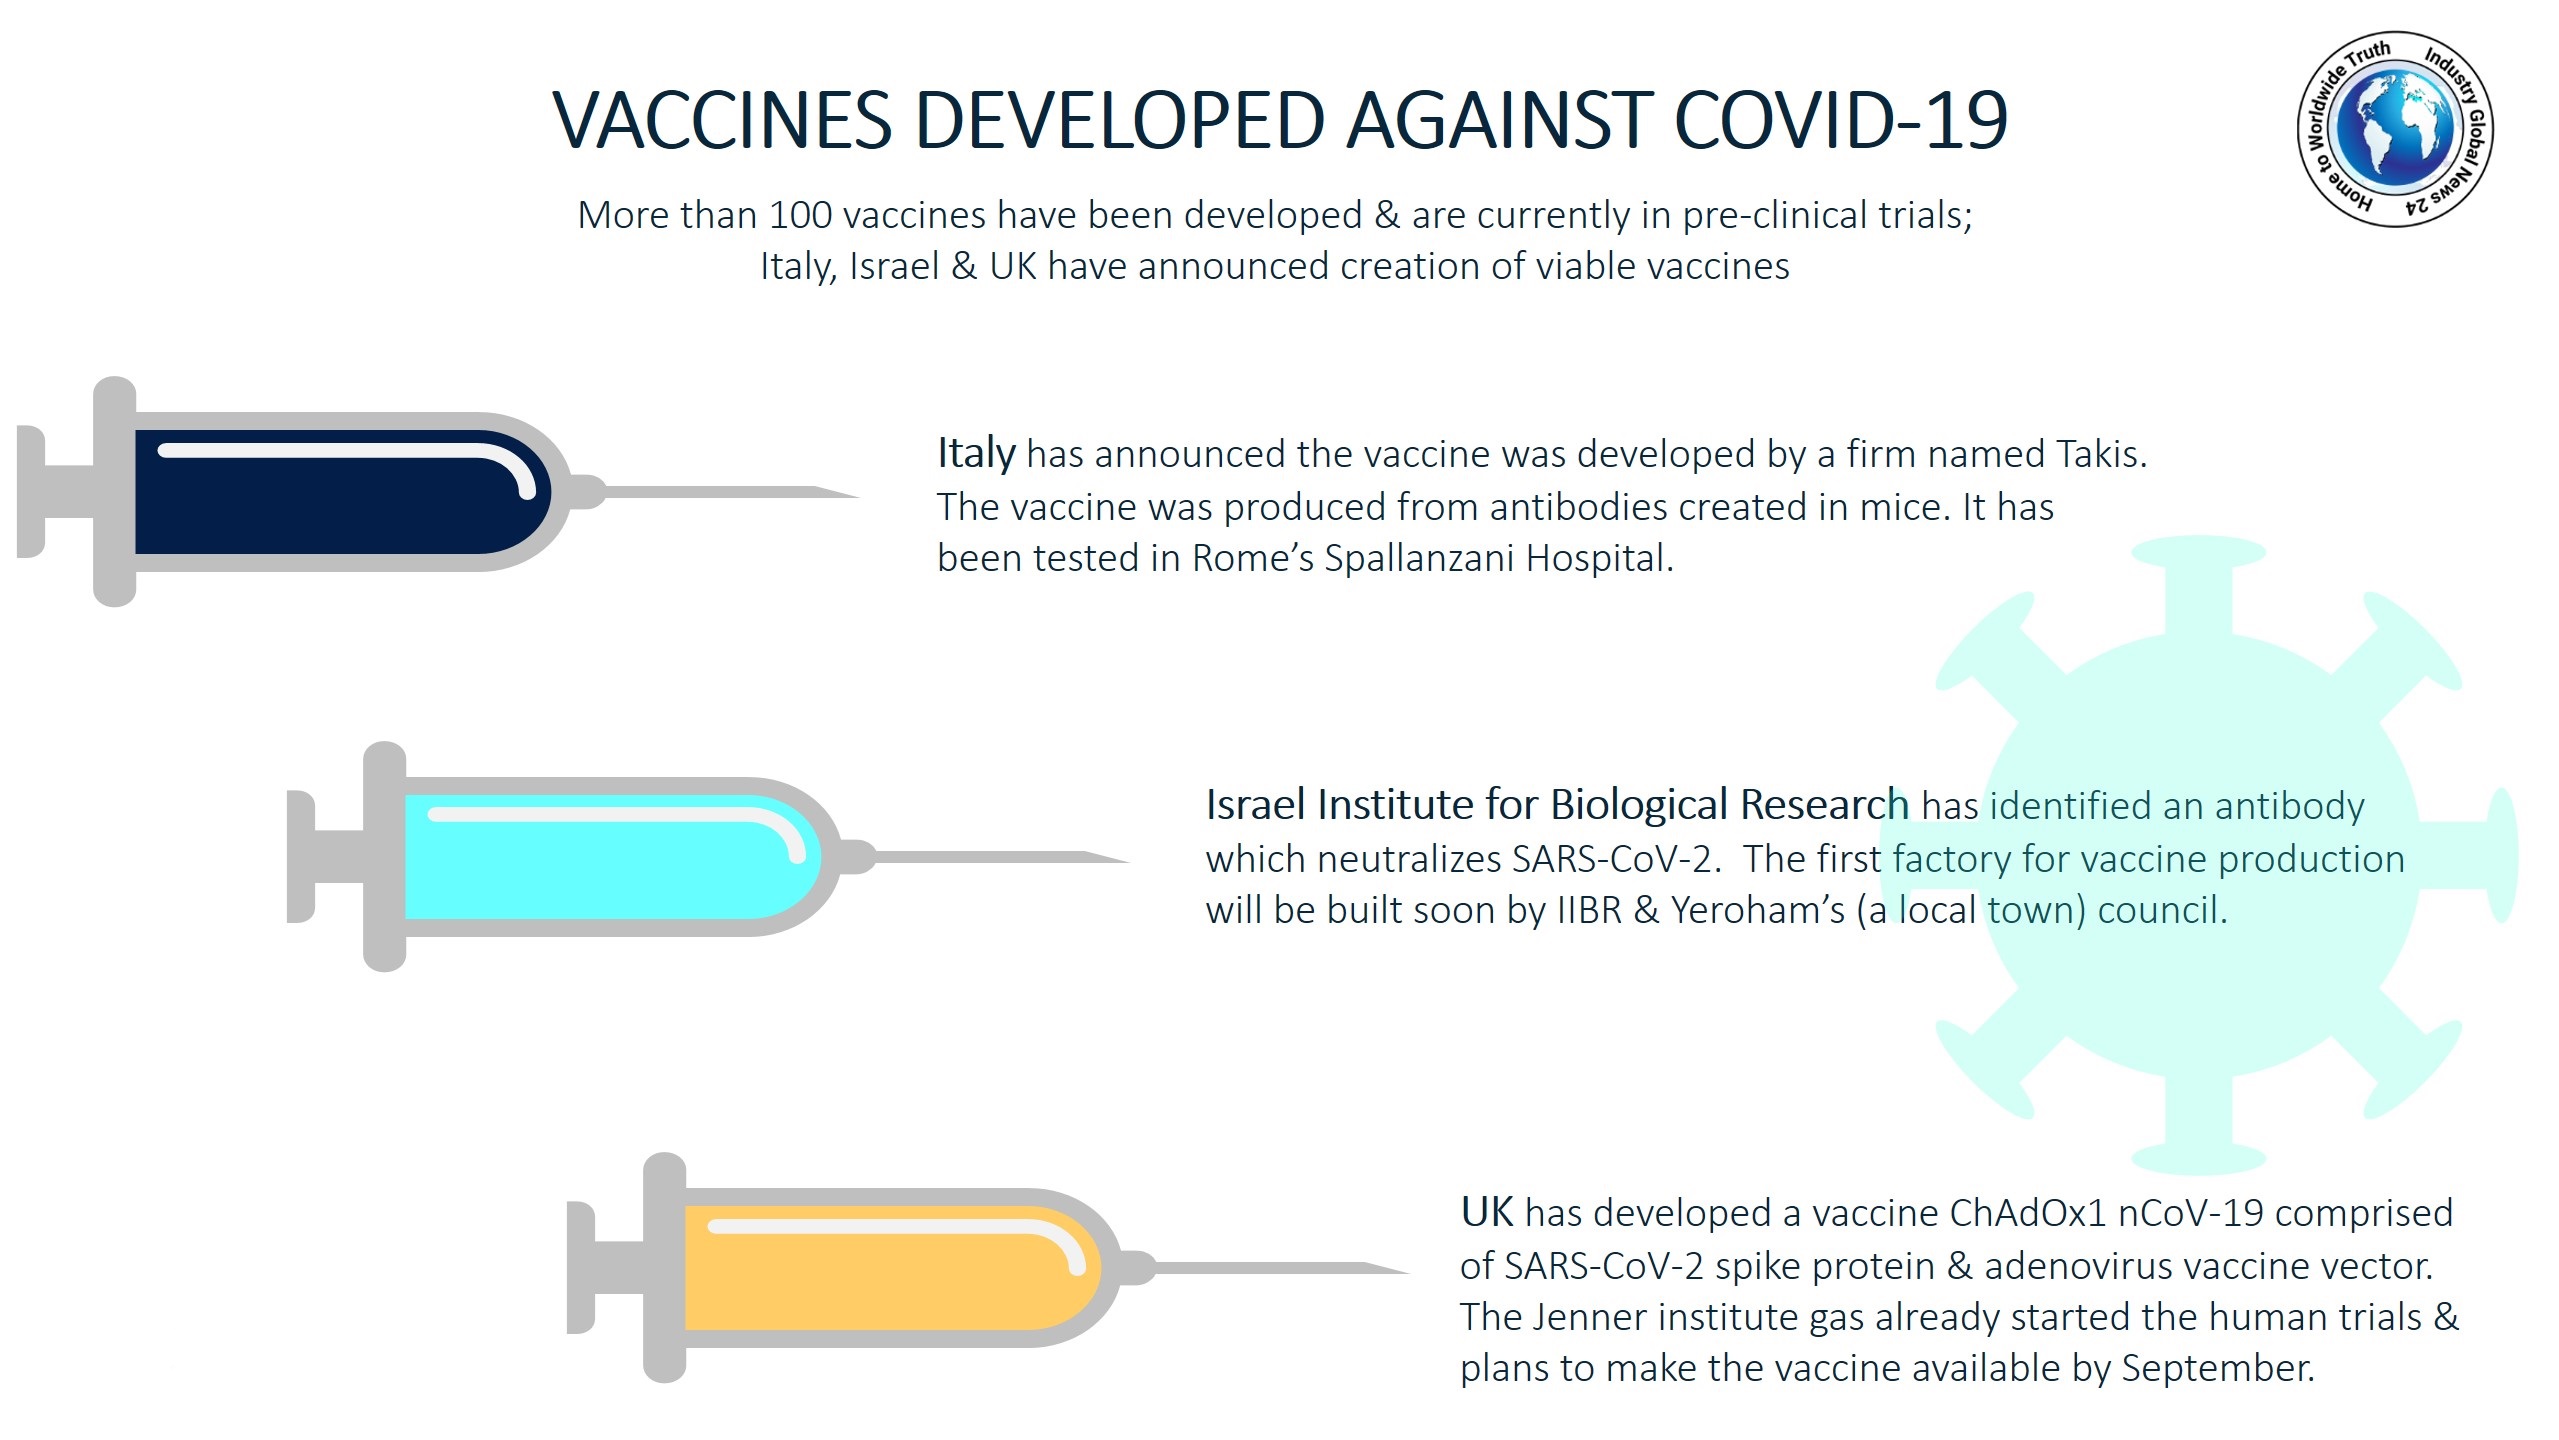 Vaccines developed against COVID-19